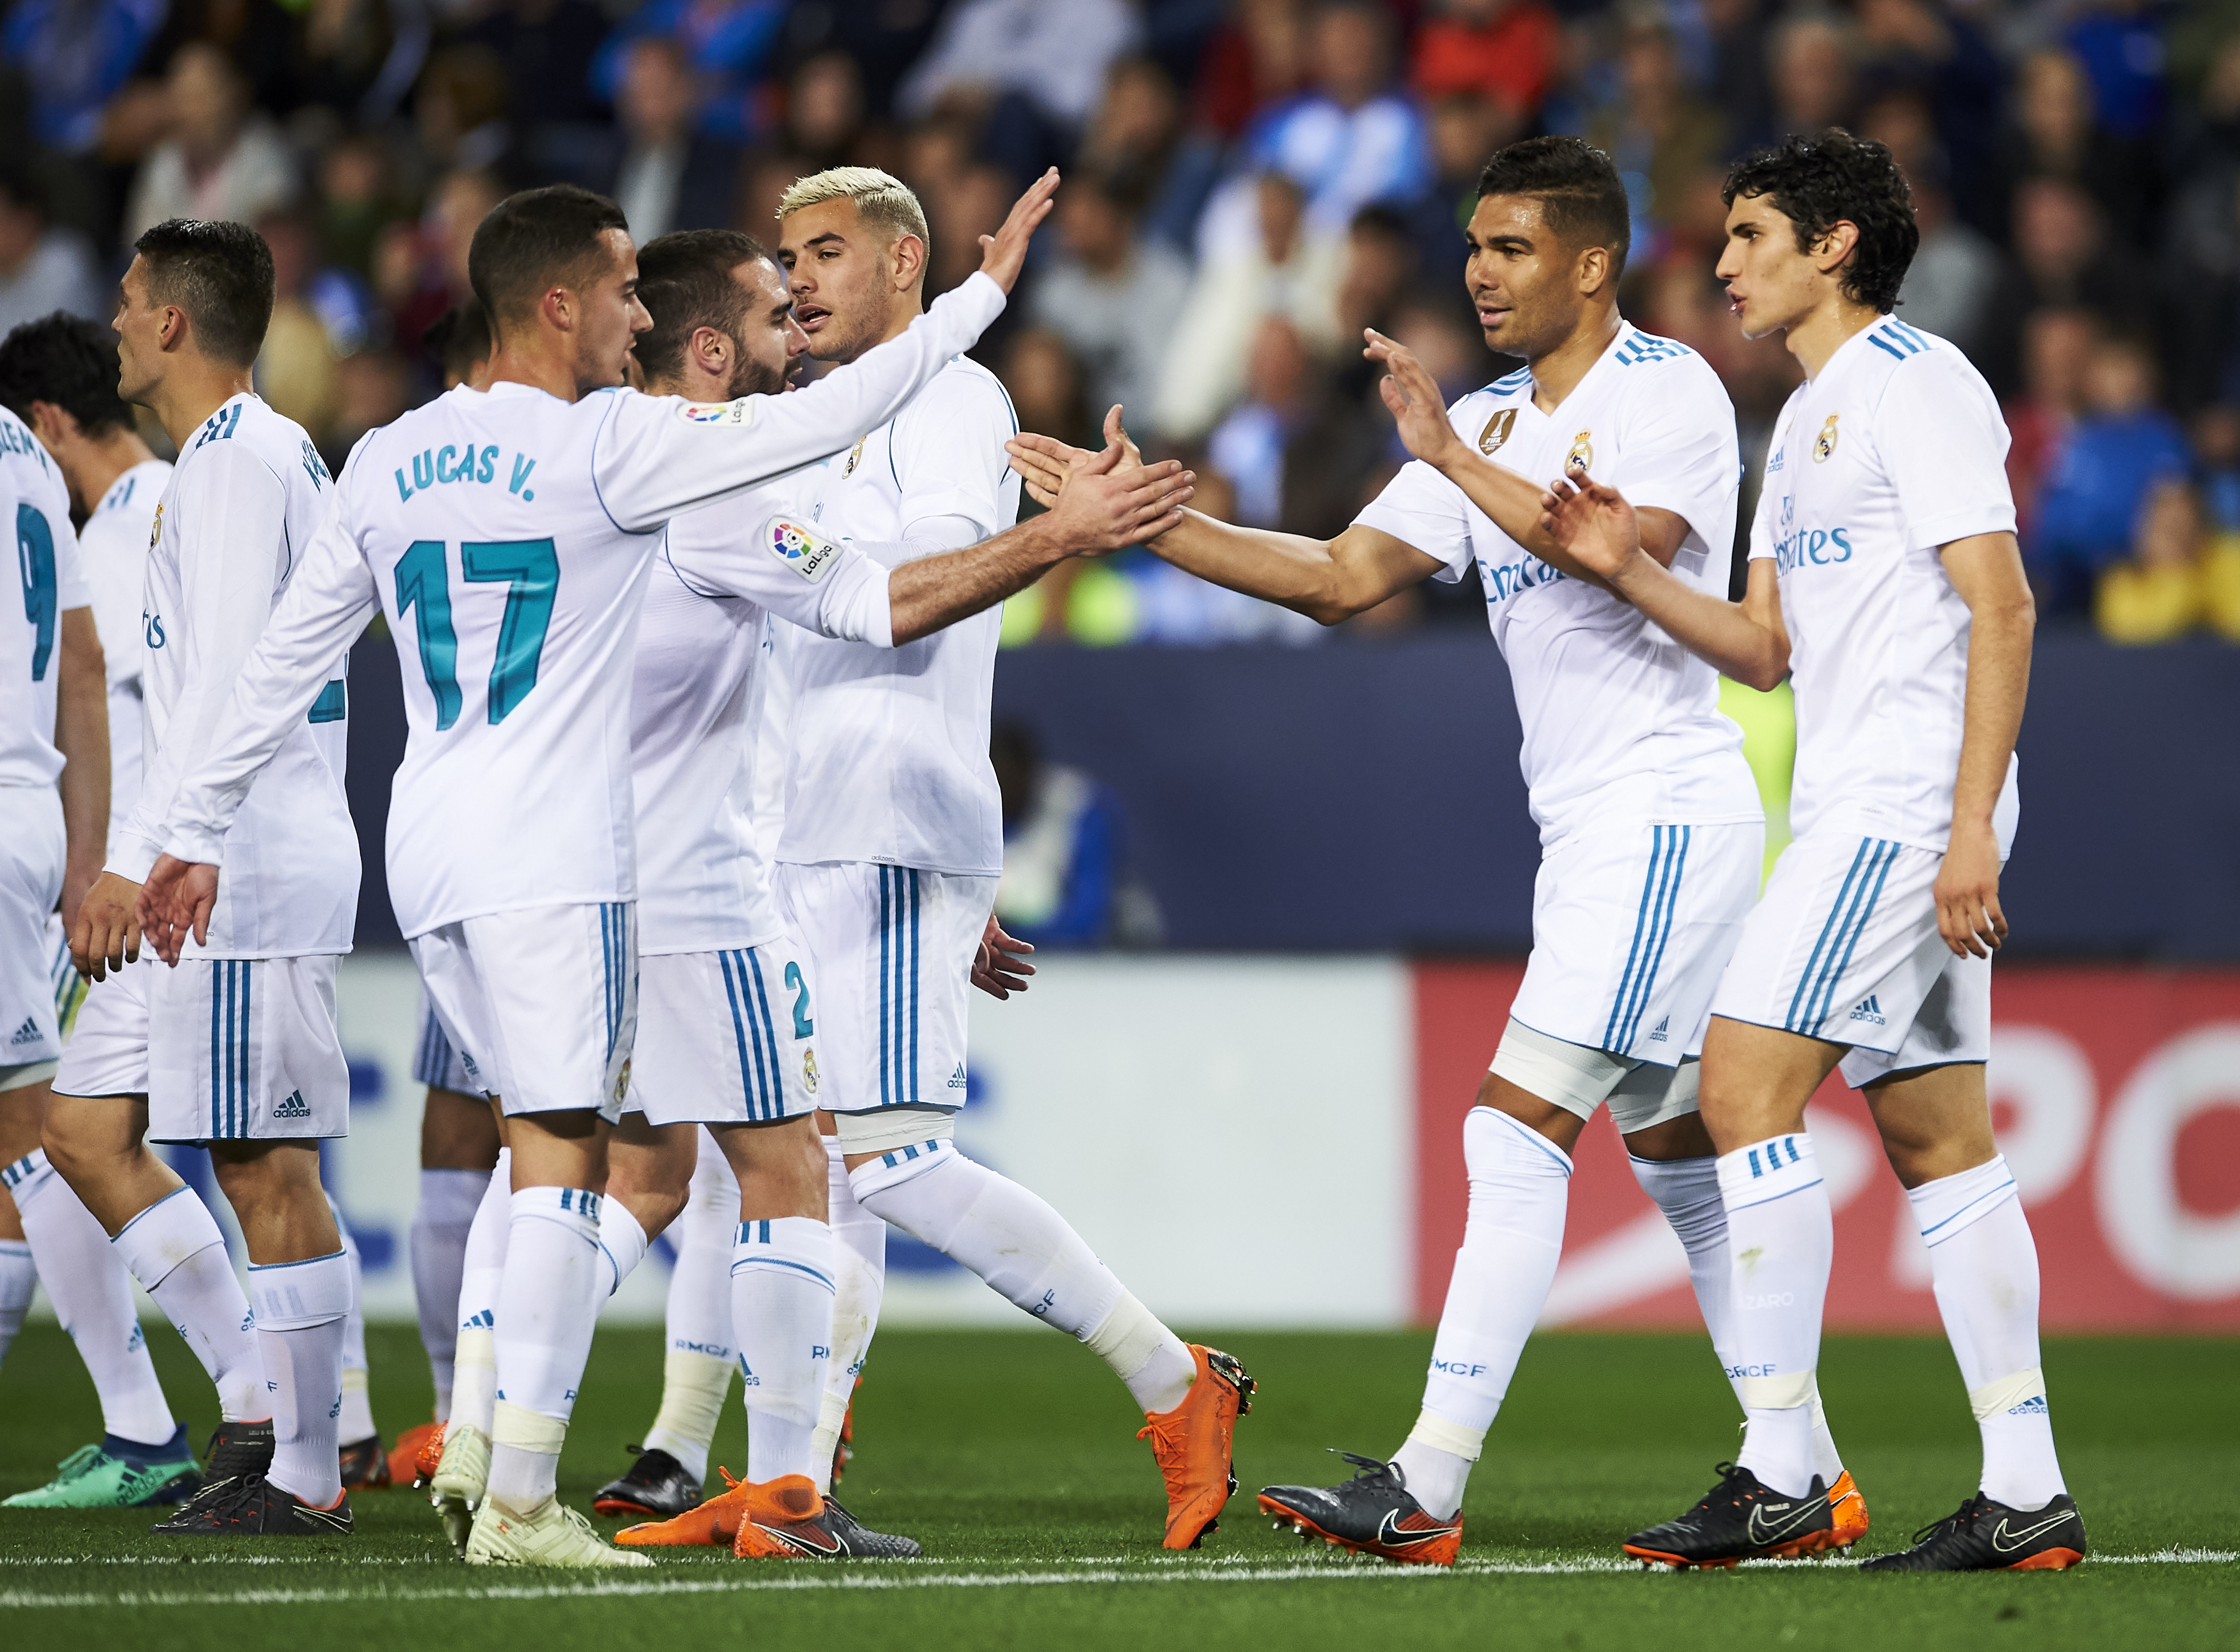 MALAGA, SPAIN - APRIL 15:  Casemiro of Real Madrid celebrates after scoring his team's second goal during the La Liga match between Malaga CF and Real Madrid CF at Estadio La Rosaleda on April 15, 2018 in Malaga, Spain.  (Photo by Aitor Alcalde/Getty Images)